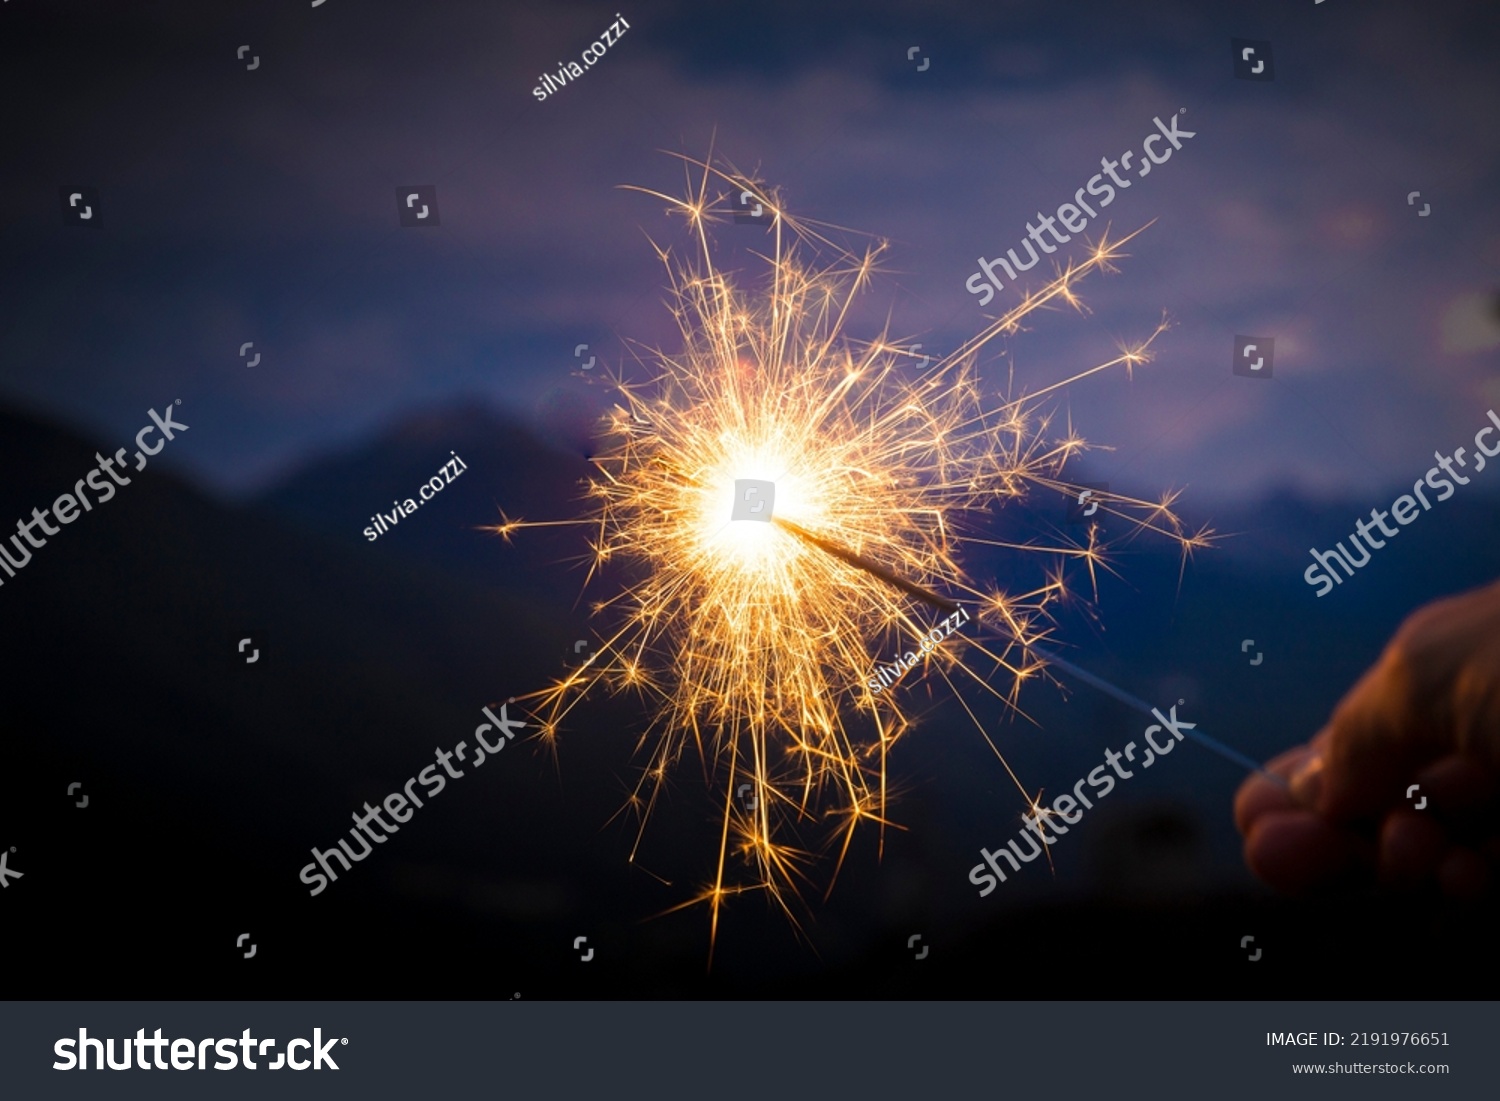 Hand holding a sparkler, or bengal fire stick, burning in outdoor setting, mountain landscape, at dusk. Holidays or magic background or wallpaper. #2191976651